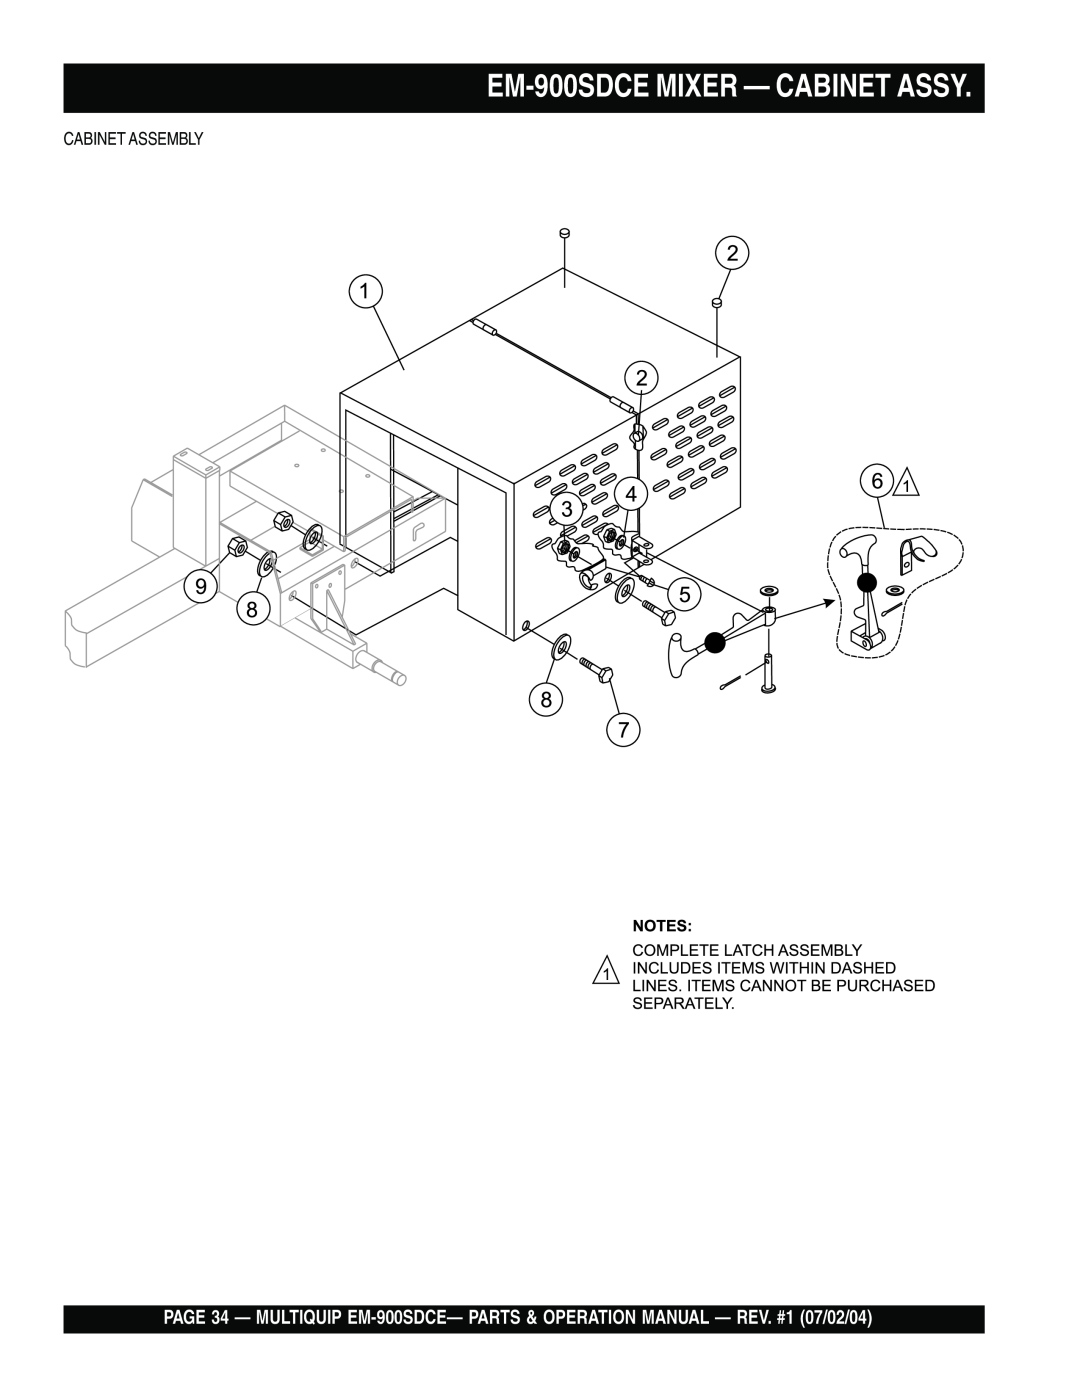 Multiquip manual EM-900SDCE MIXER - CABINET ASSY, Cabinet Assembly 